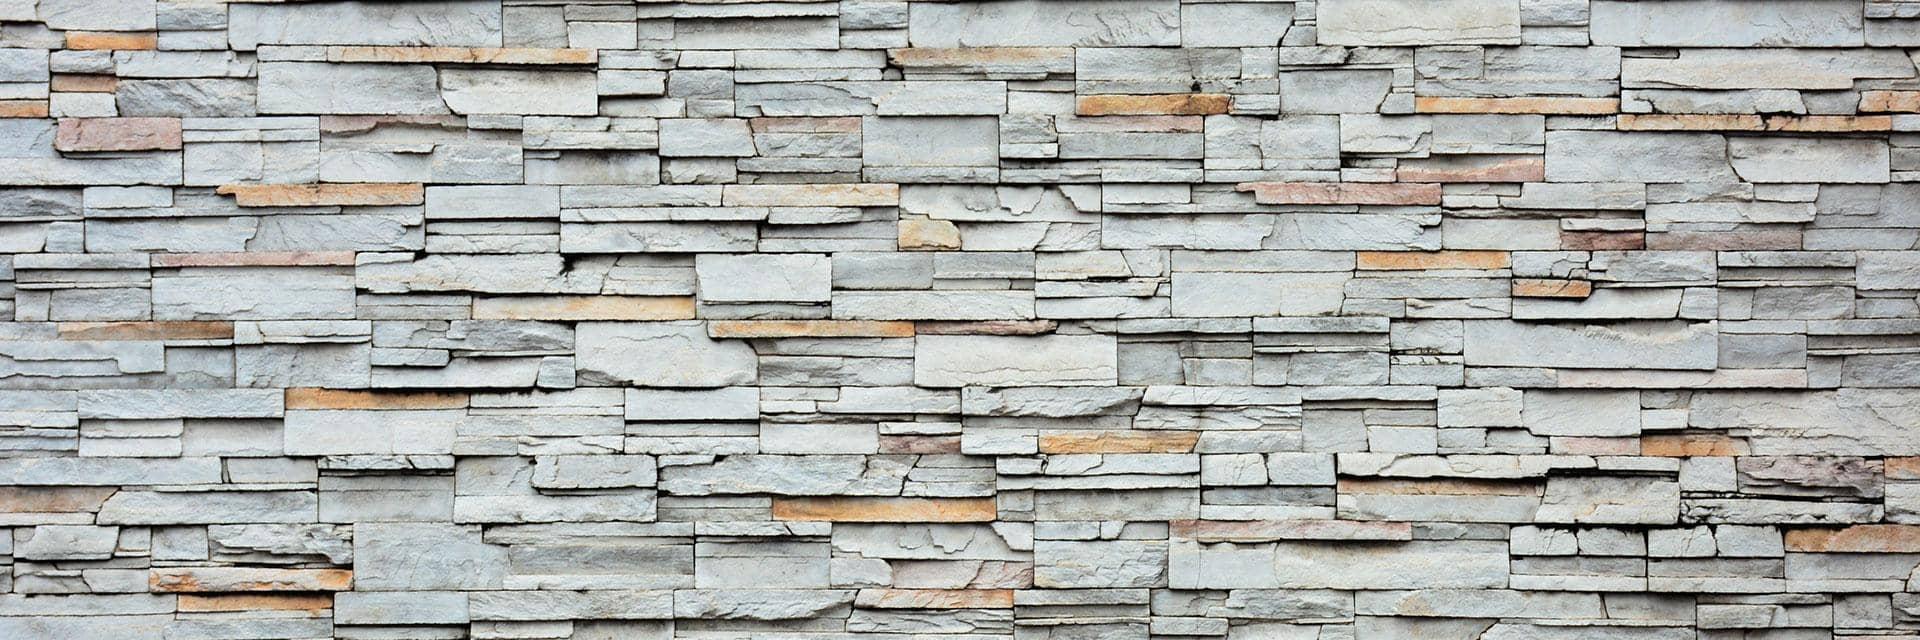 A wall made of natural stone. More businesses in construction are using the BREAAM standard.
